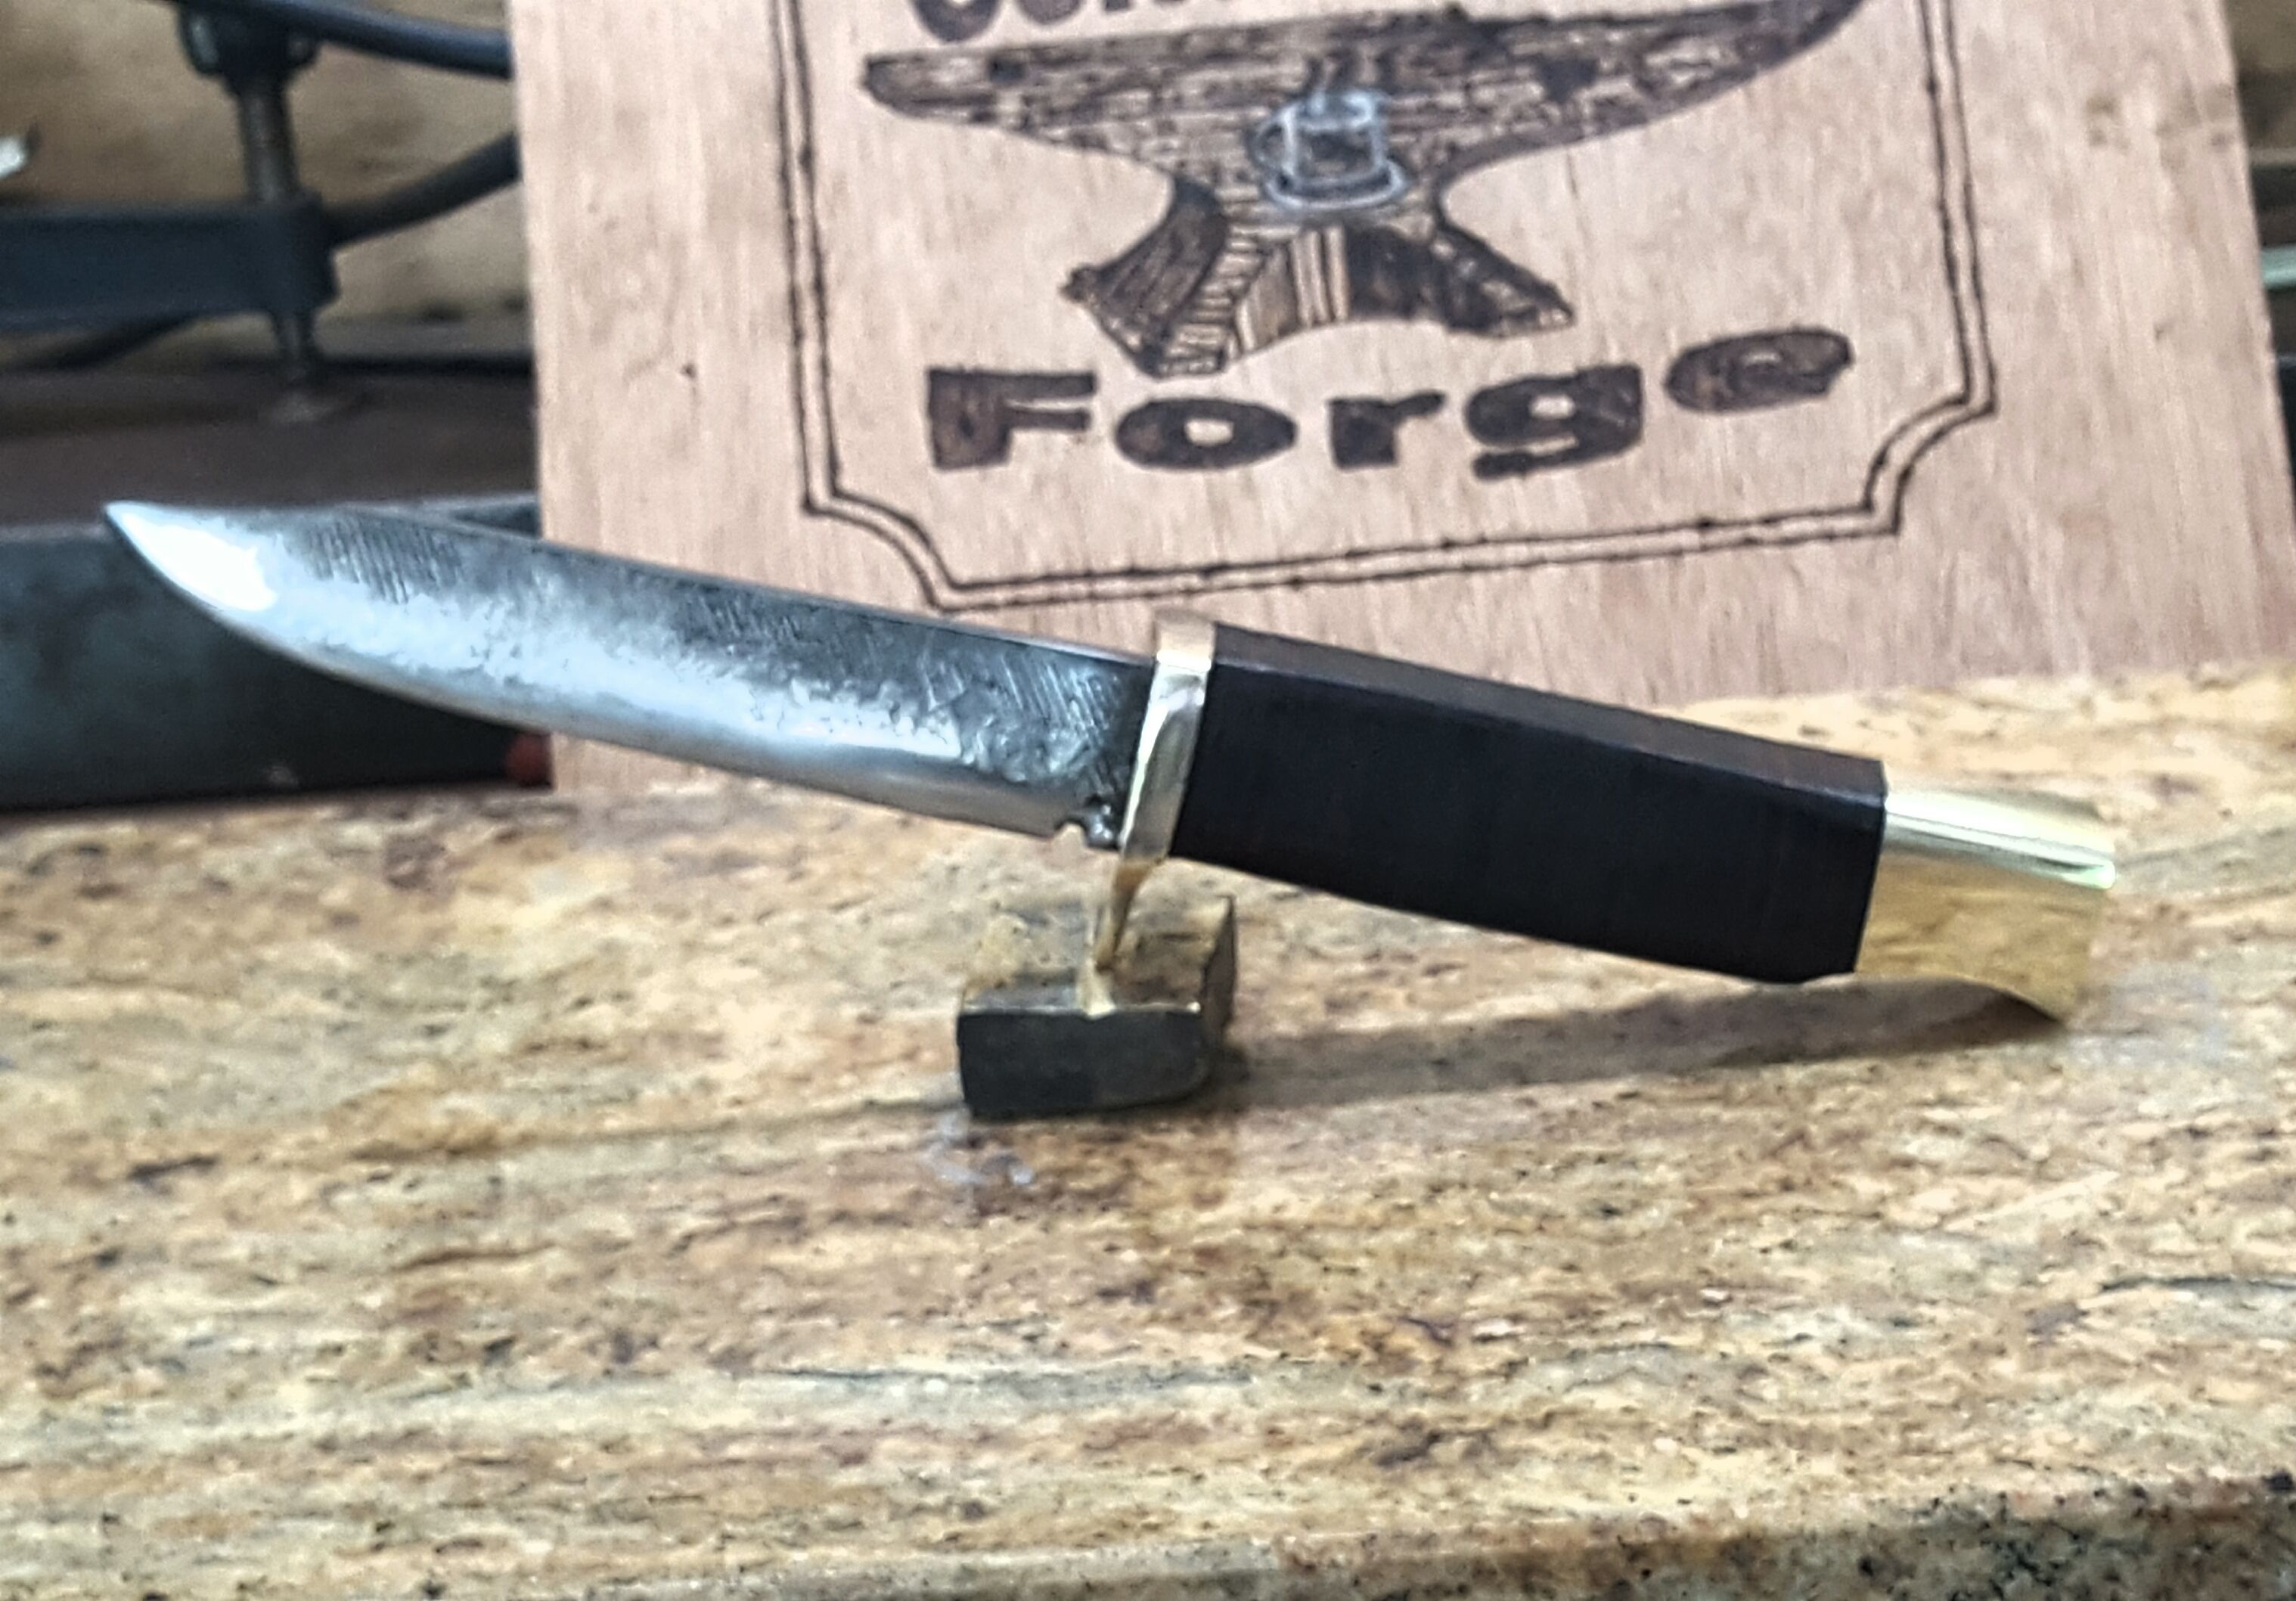 Buy Custom Forged Drop Point Knife, Brass Bolsters And Guards, Stacked  Leather Handle, made to order from CoffeeHouseForge